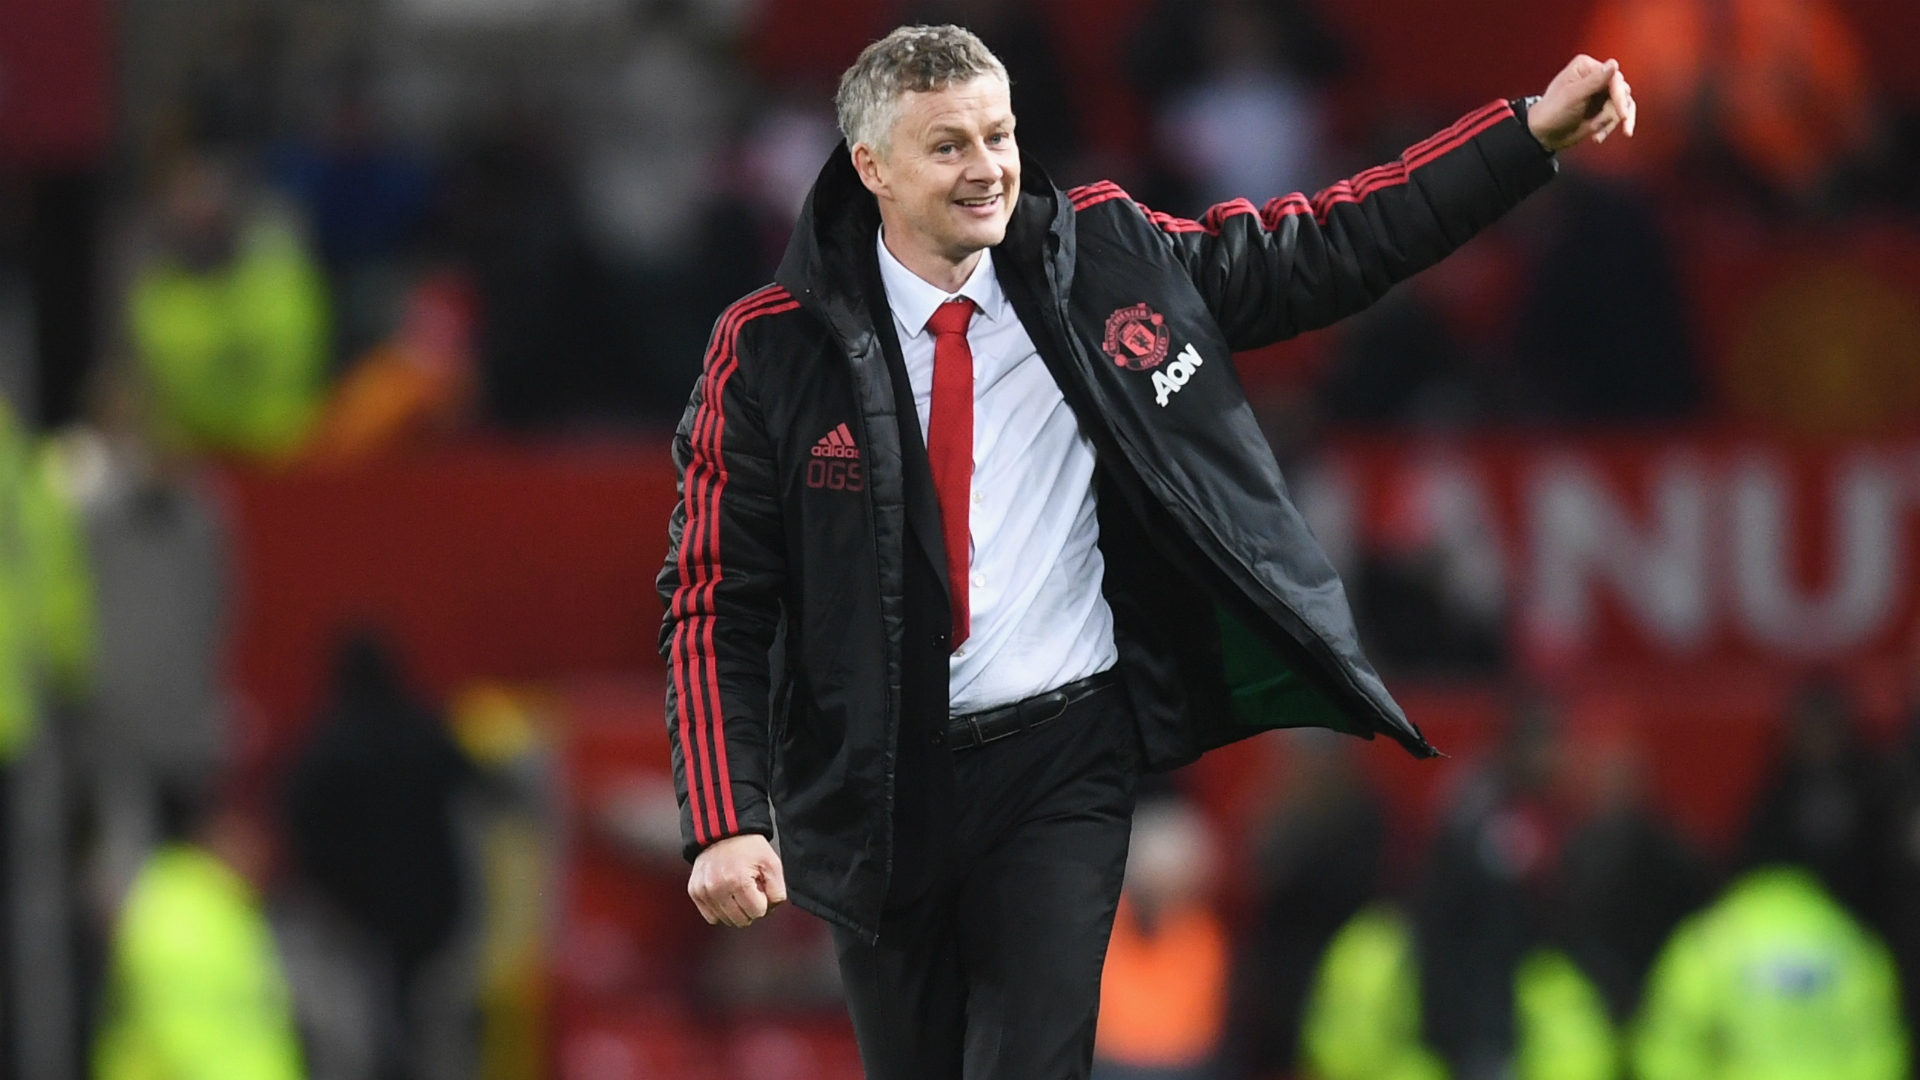 Ole Gunnar Solskjaer confirms why he was offered Manchester United